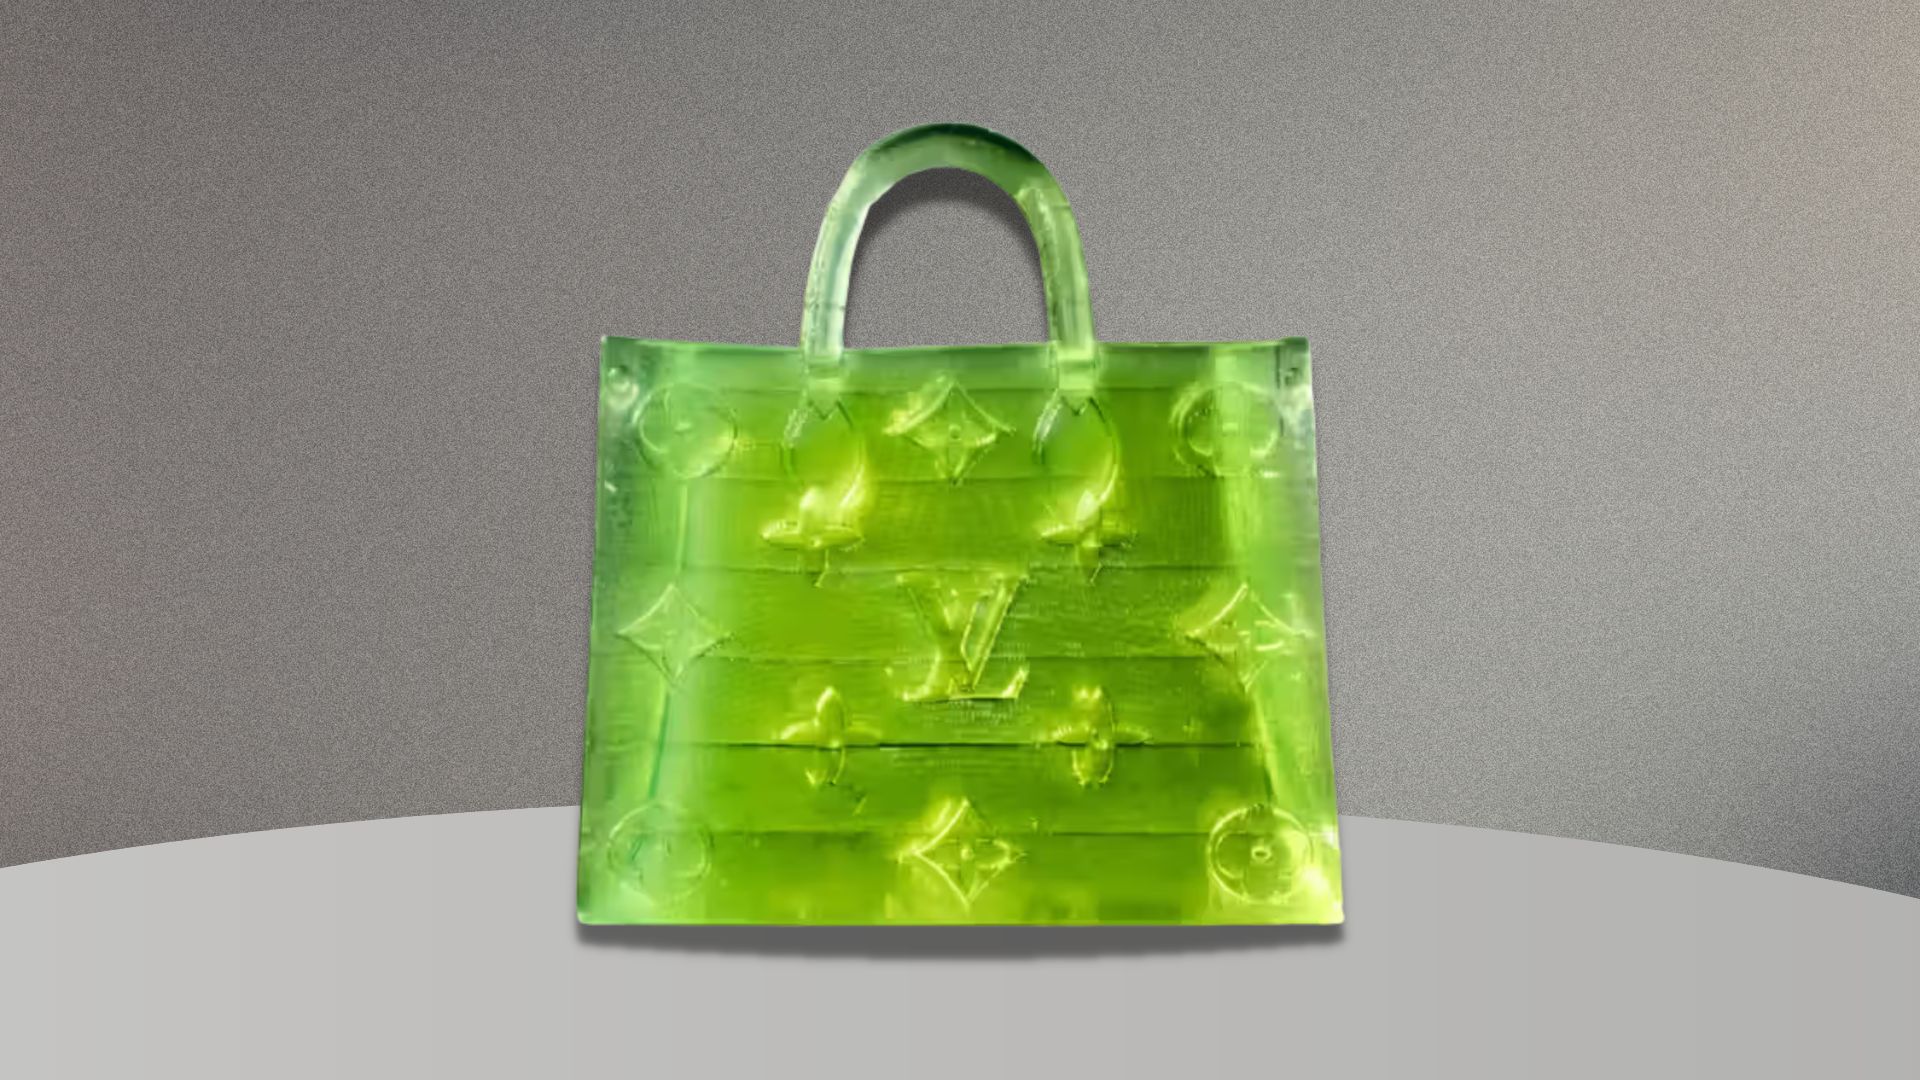 Microscopic Handbag? Why Not! MSCHF Goes To Louis Vuitton